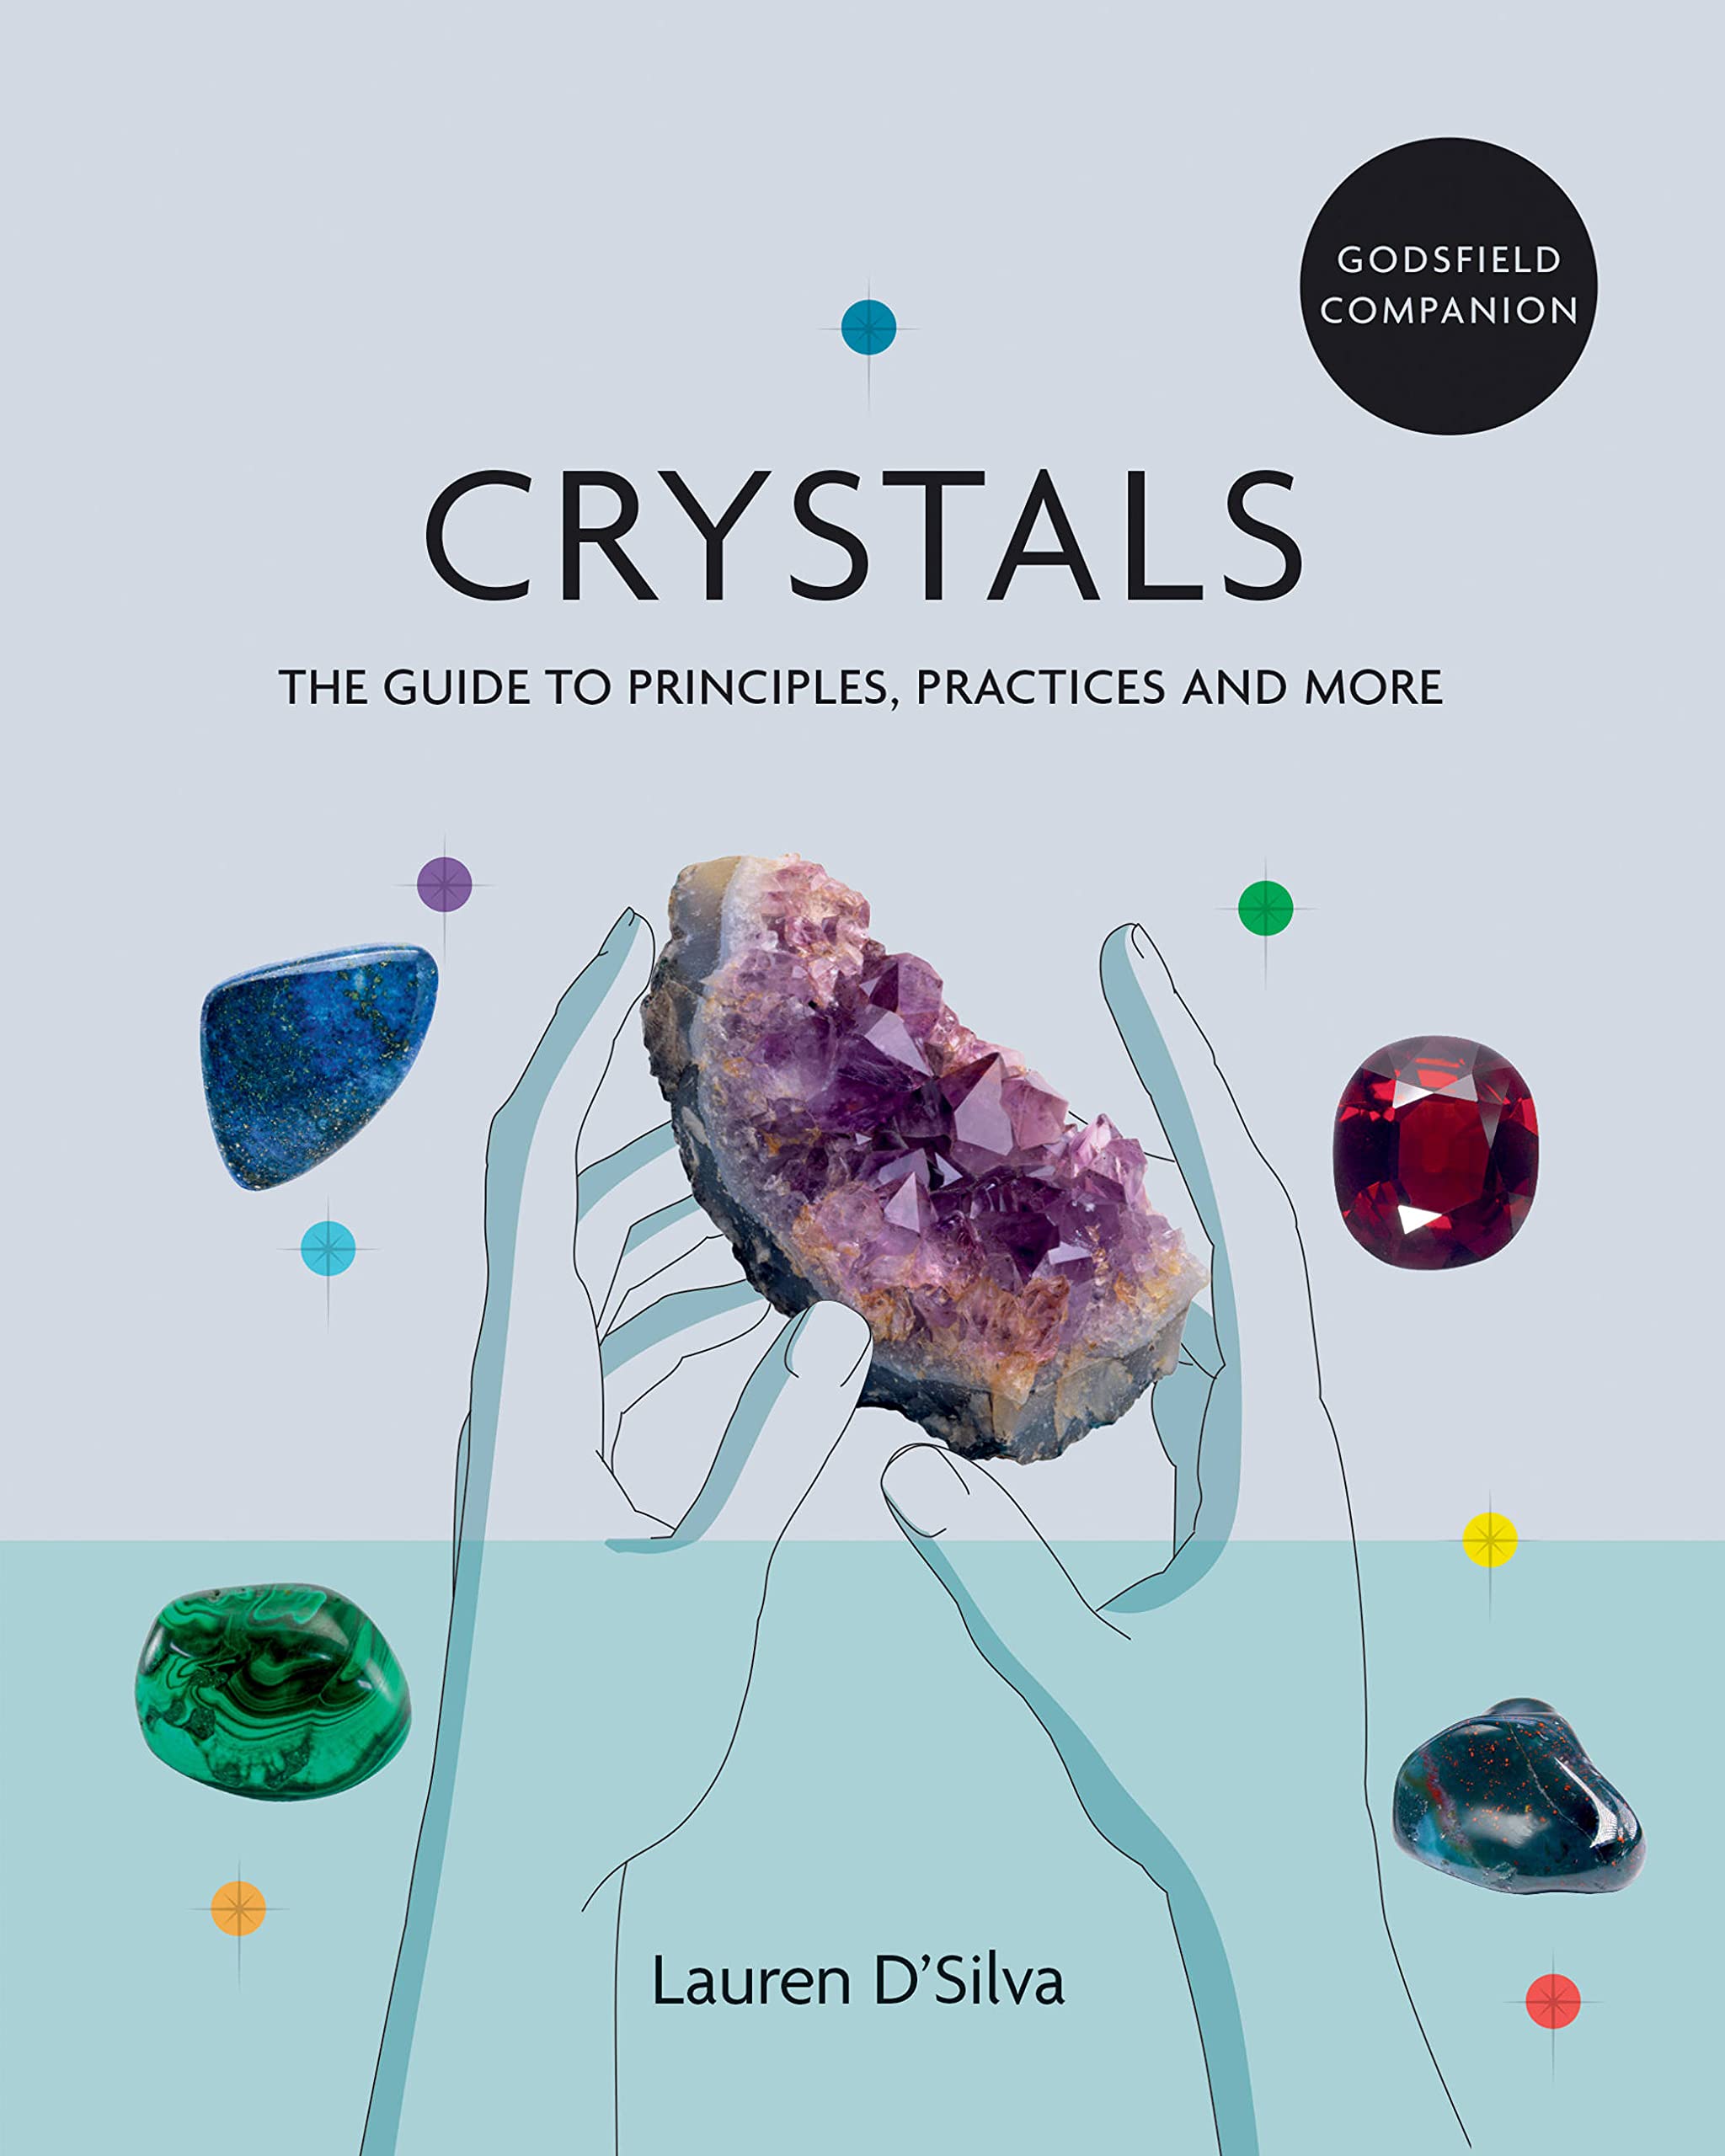 Godsfield Companion: Crystals: The Guide to Principles, Practices and More Book by Lauren D'Silva